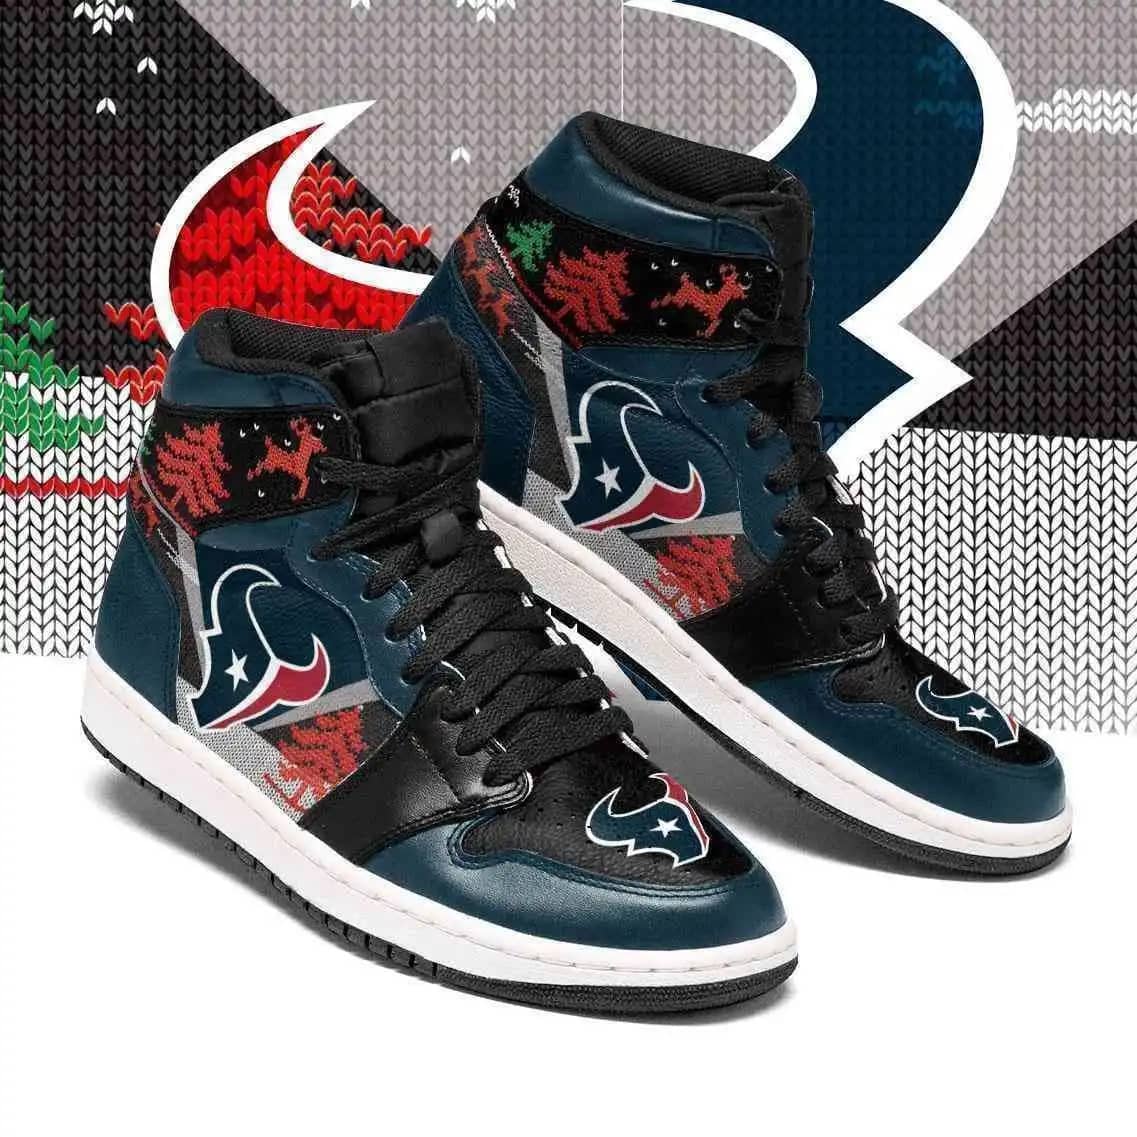 Christmas Houston Texans Nfl Air Perfect Gift For Fans Air Jordan Shoes